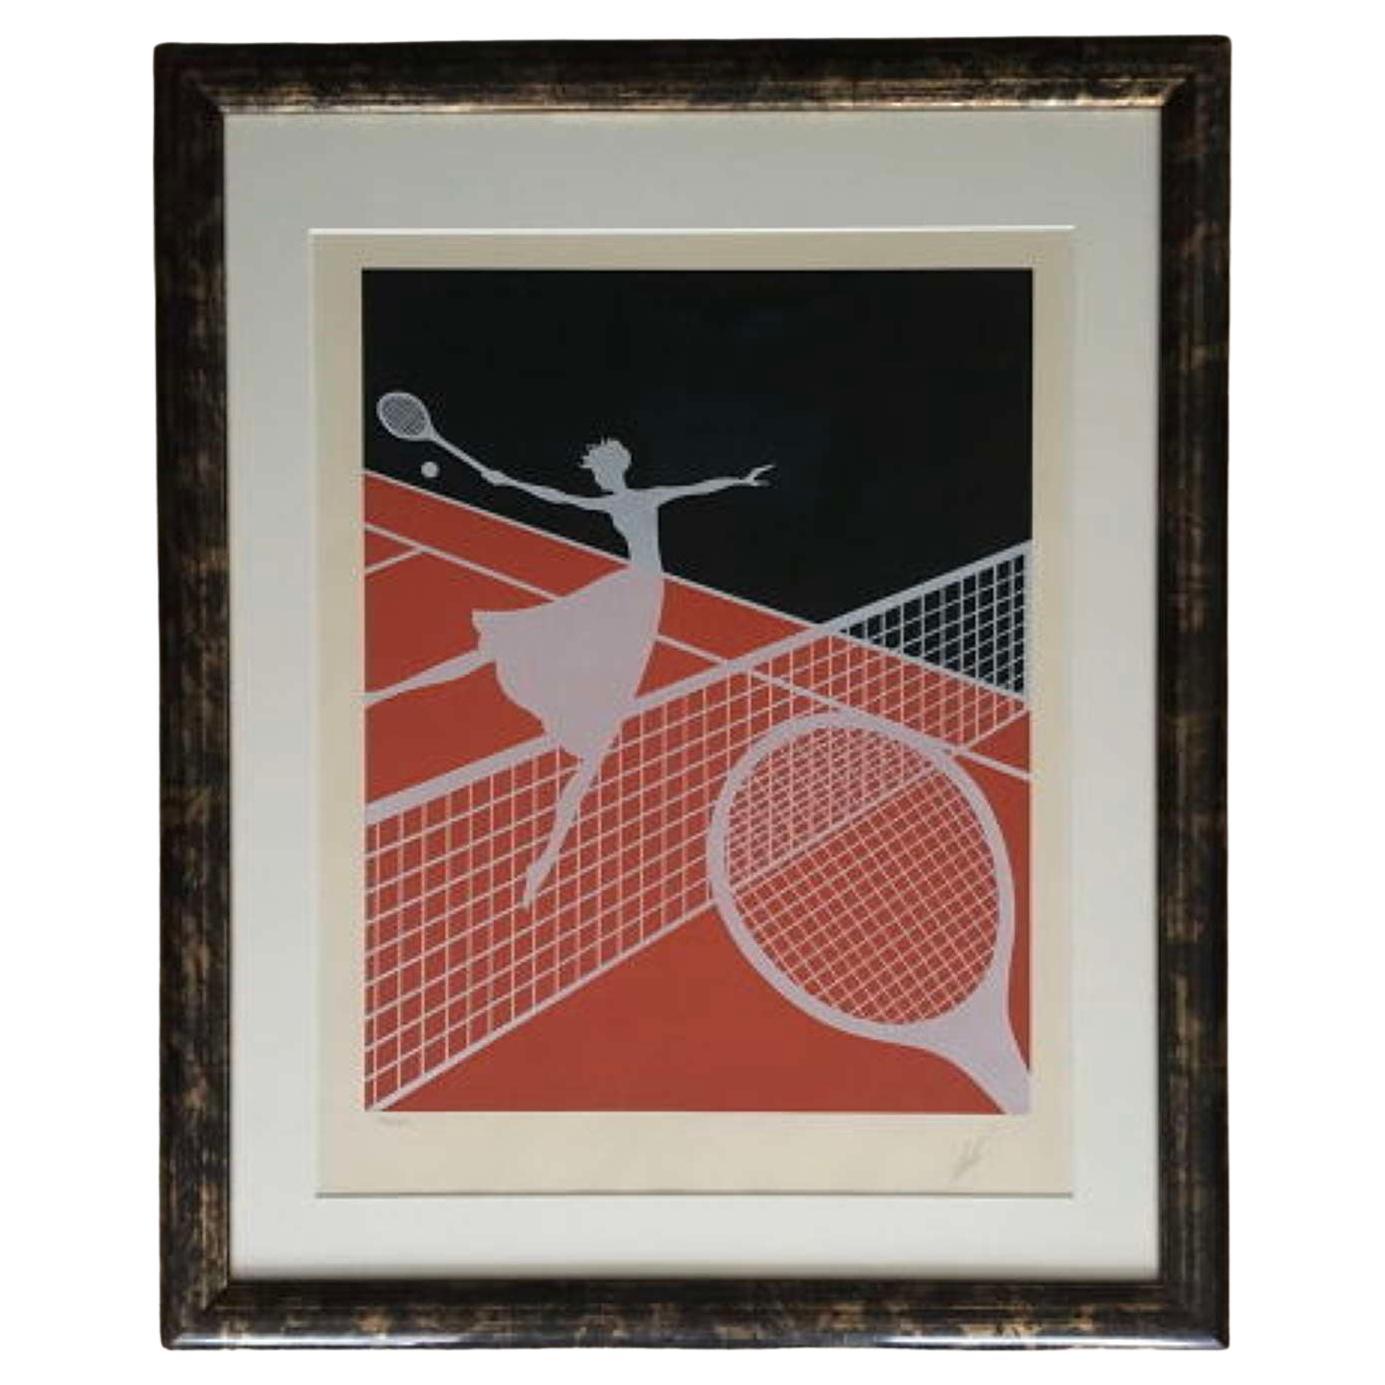 Erte - Limited Edition Signed Screen Print After the Love and Tennis 